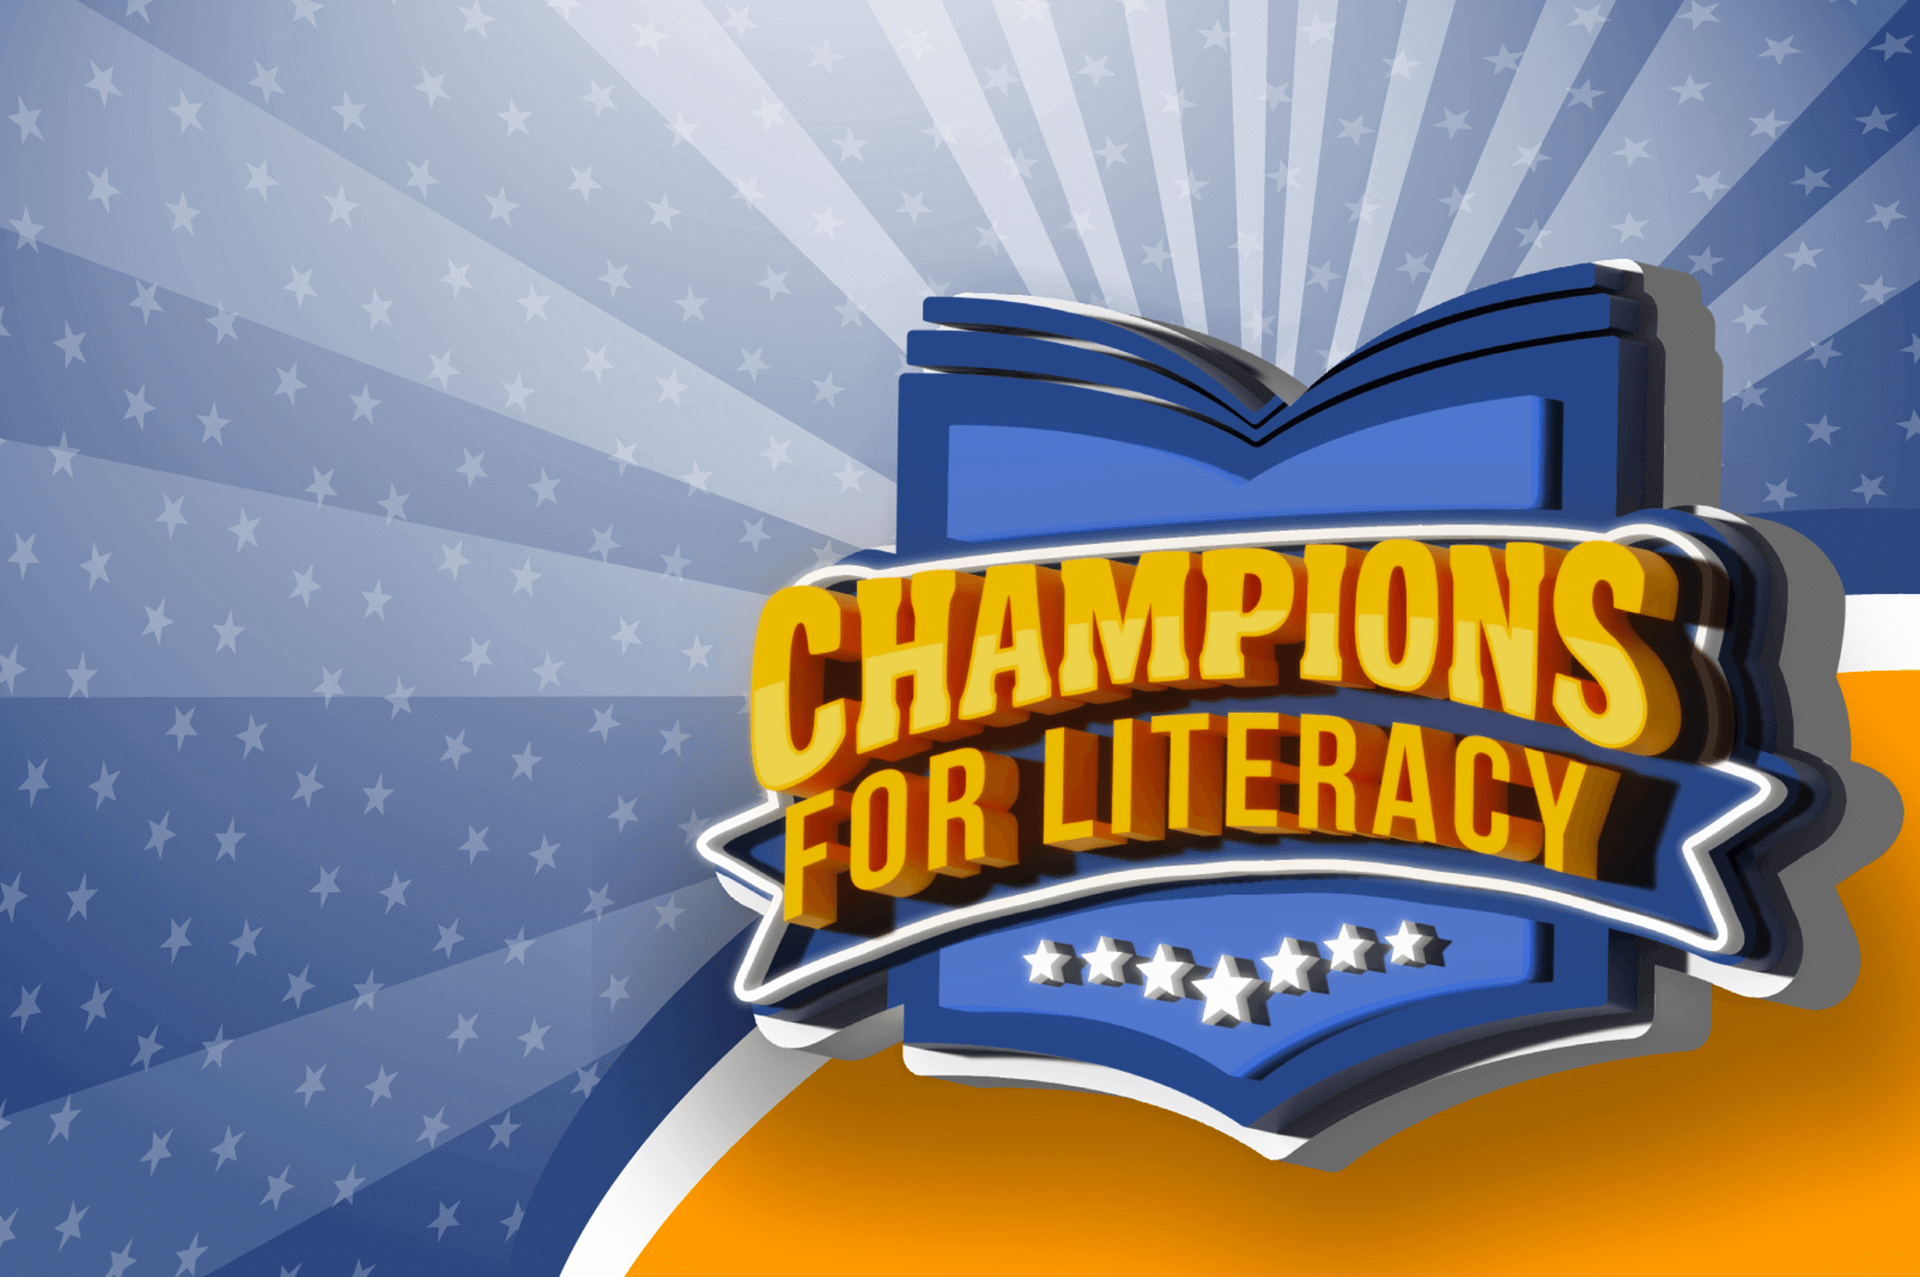 Champions for Literacy logo in large image